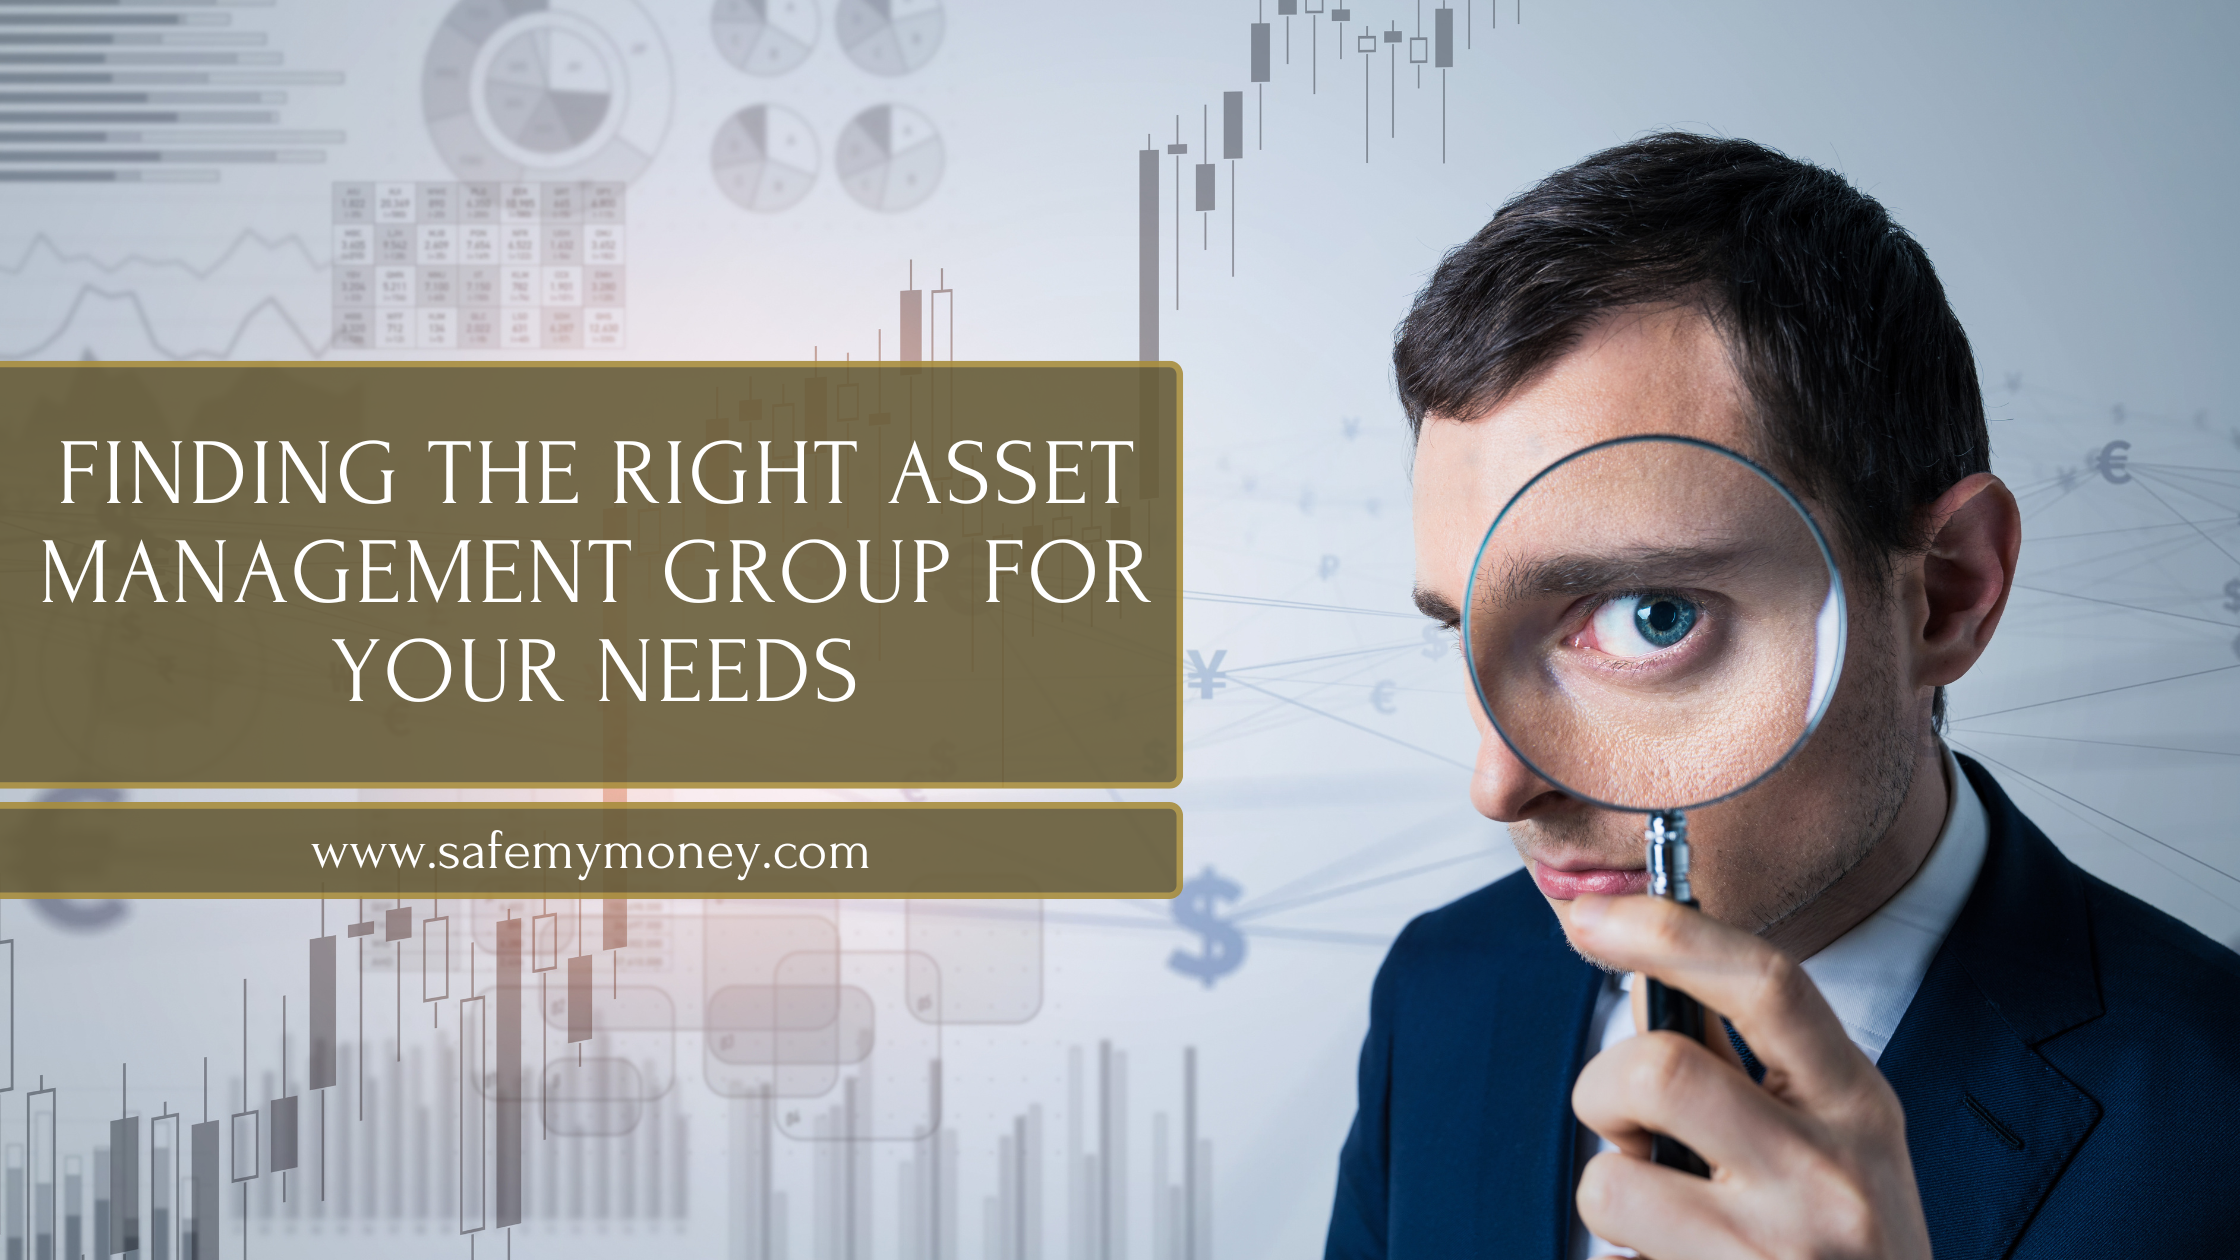 Finding the Right Asset Management Group for Your Needs